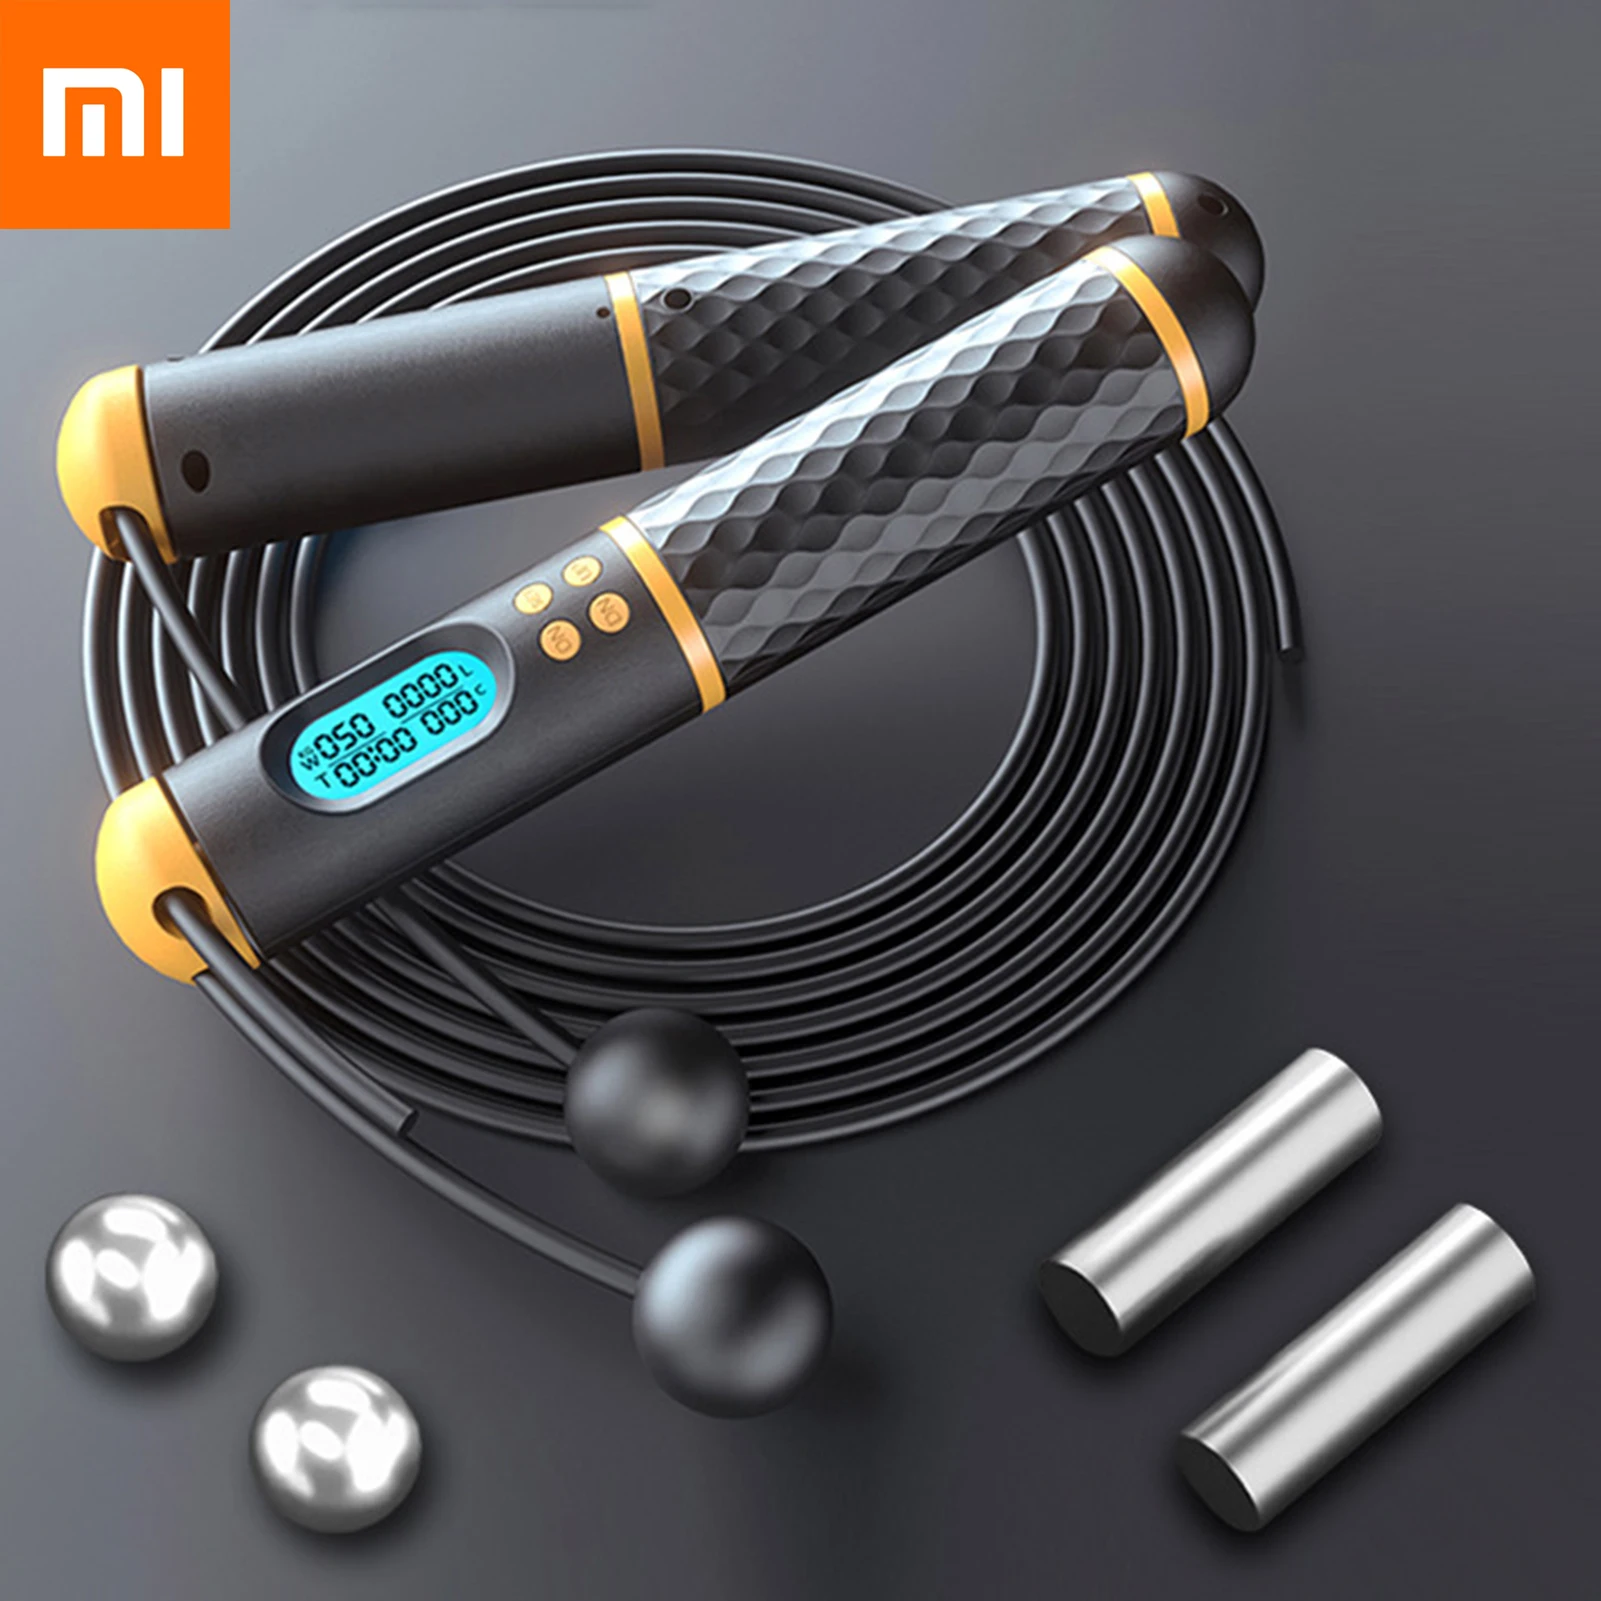 Xiaomi Digital Counting Wireles Jump Rope Cordless Skipping Rope Speed for Boxing Training Weight Loss Home Exercise Workout Hot